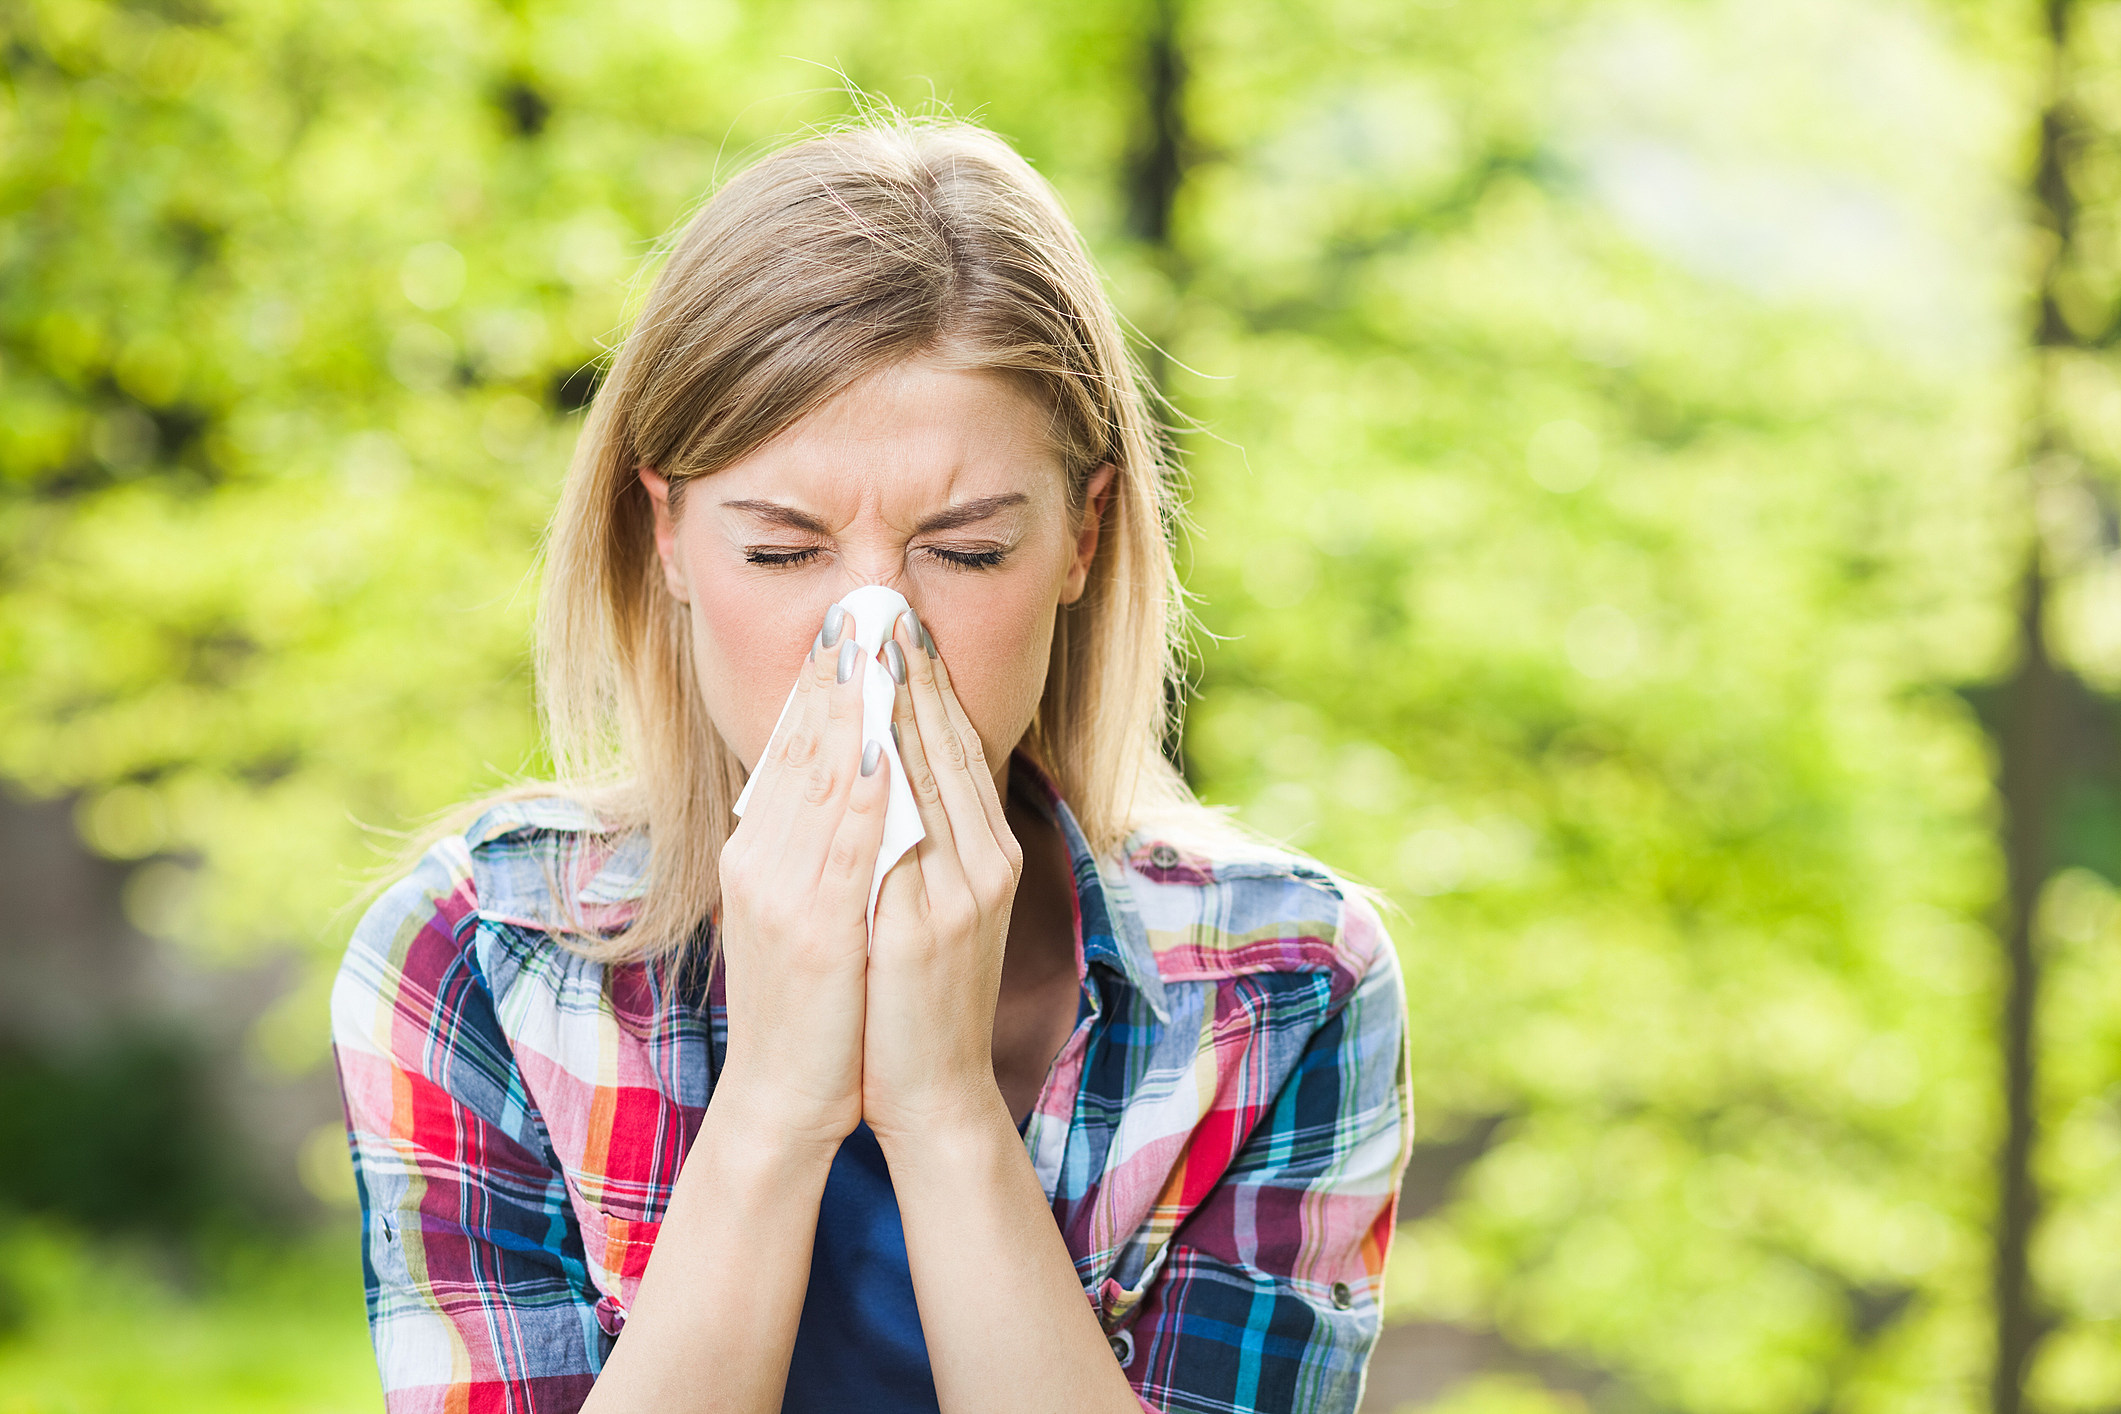 Pollen Allergies: Types, Symptoms, and Treatment